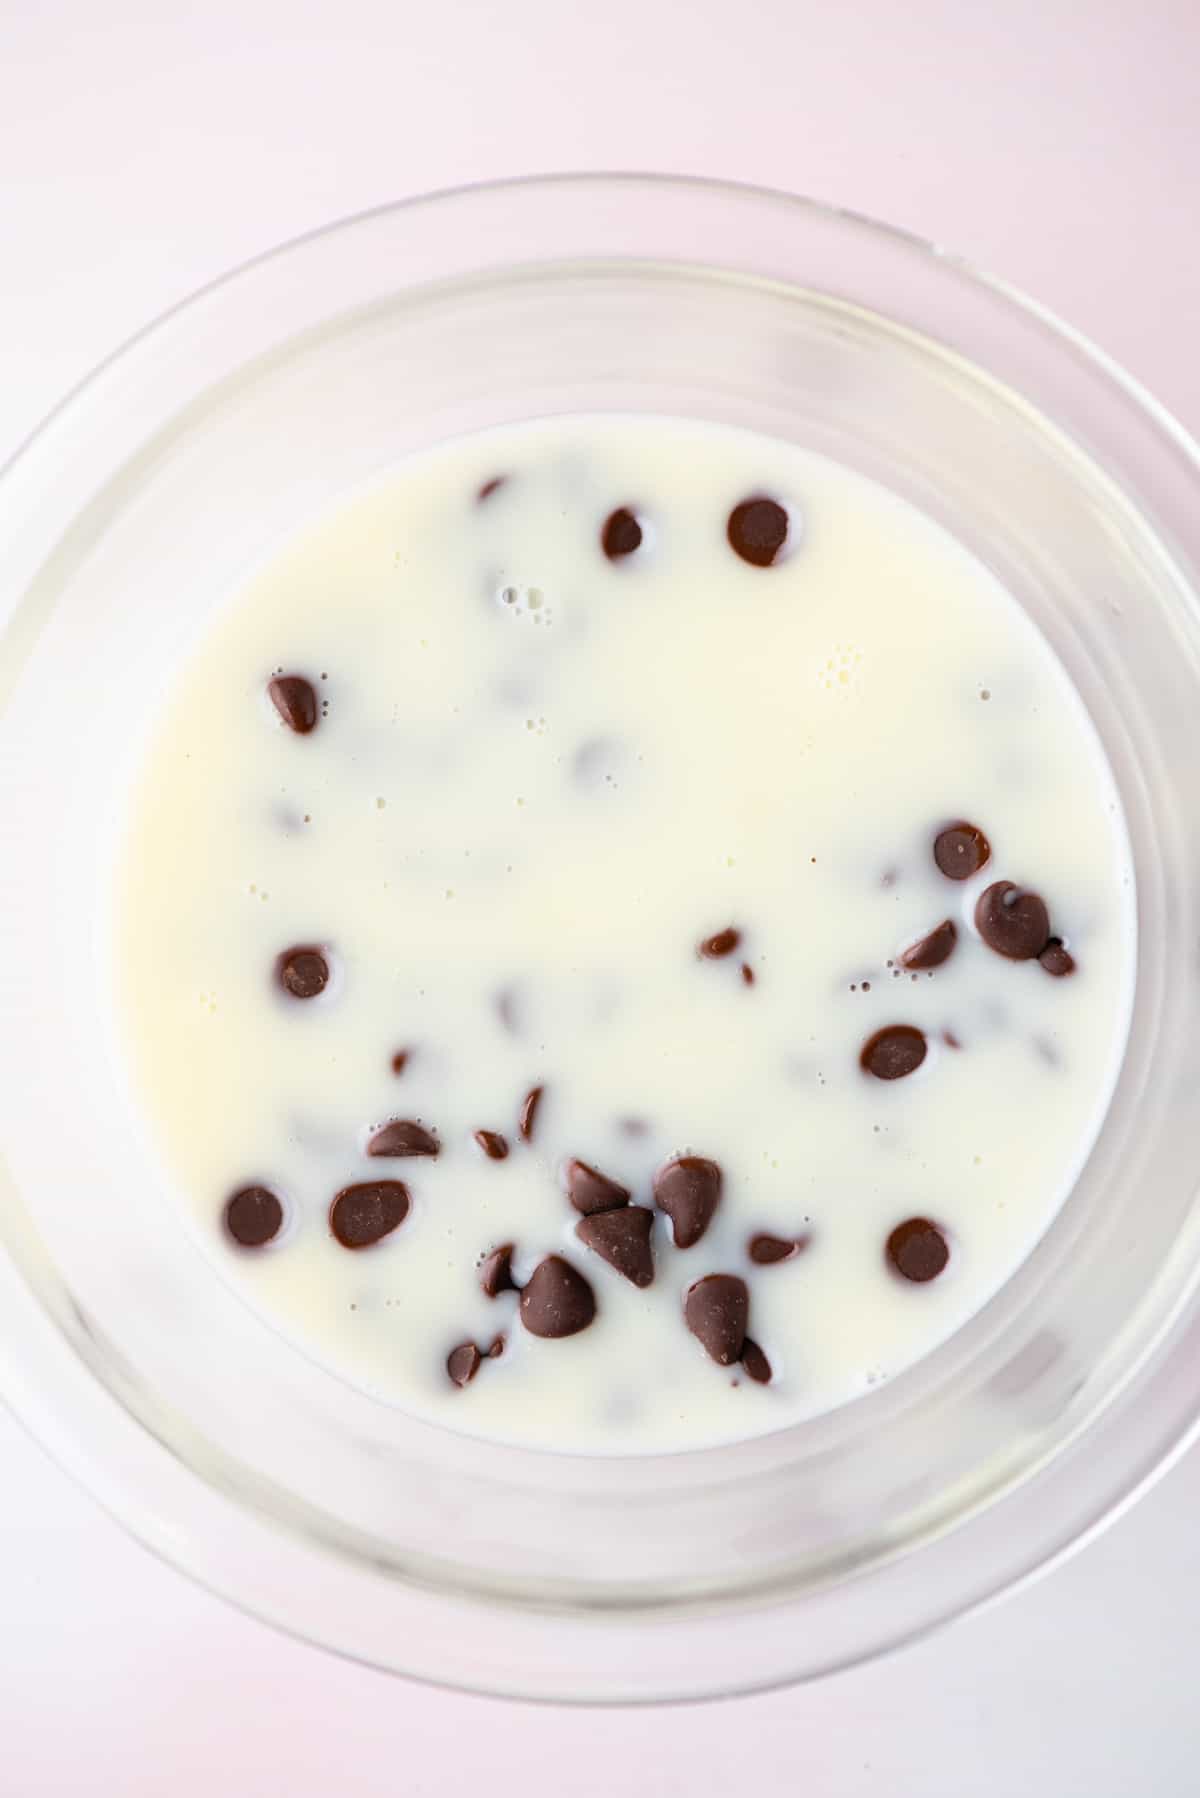 A heavy cream and sugar mixture in a glass bowl with chocolate chips